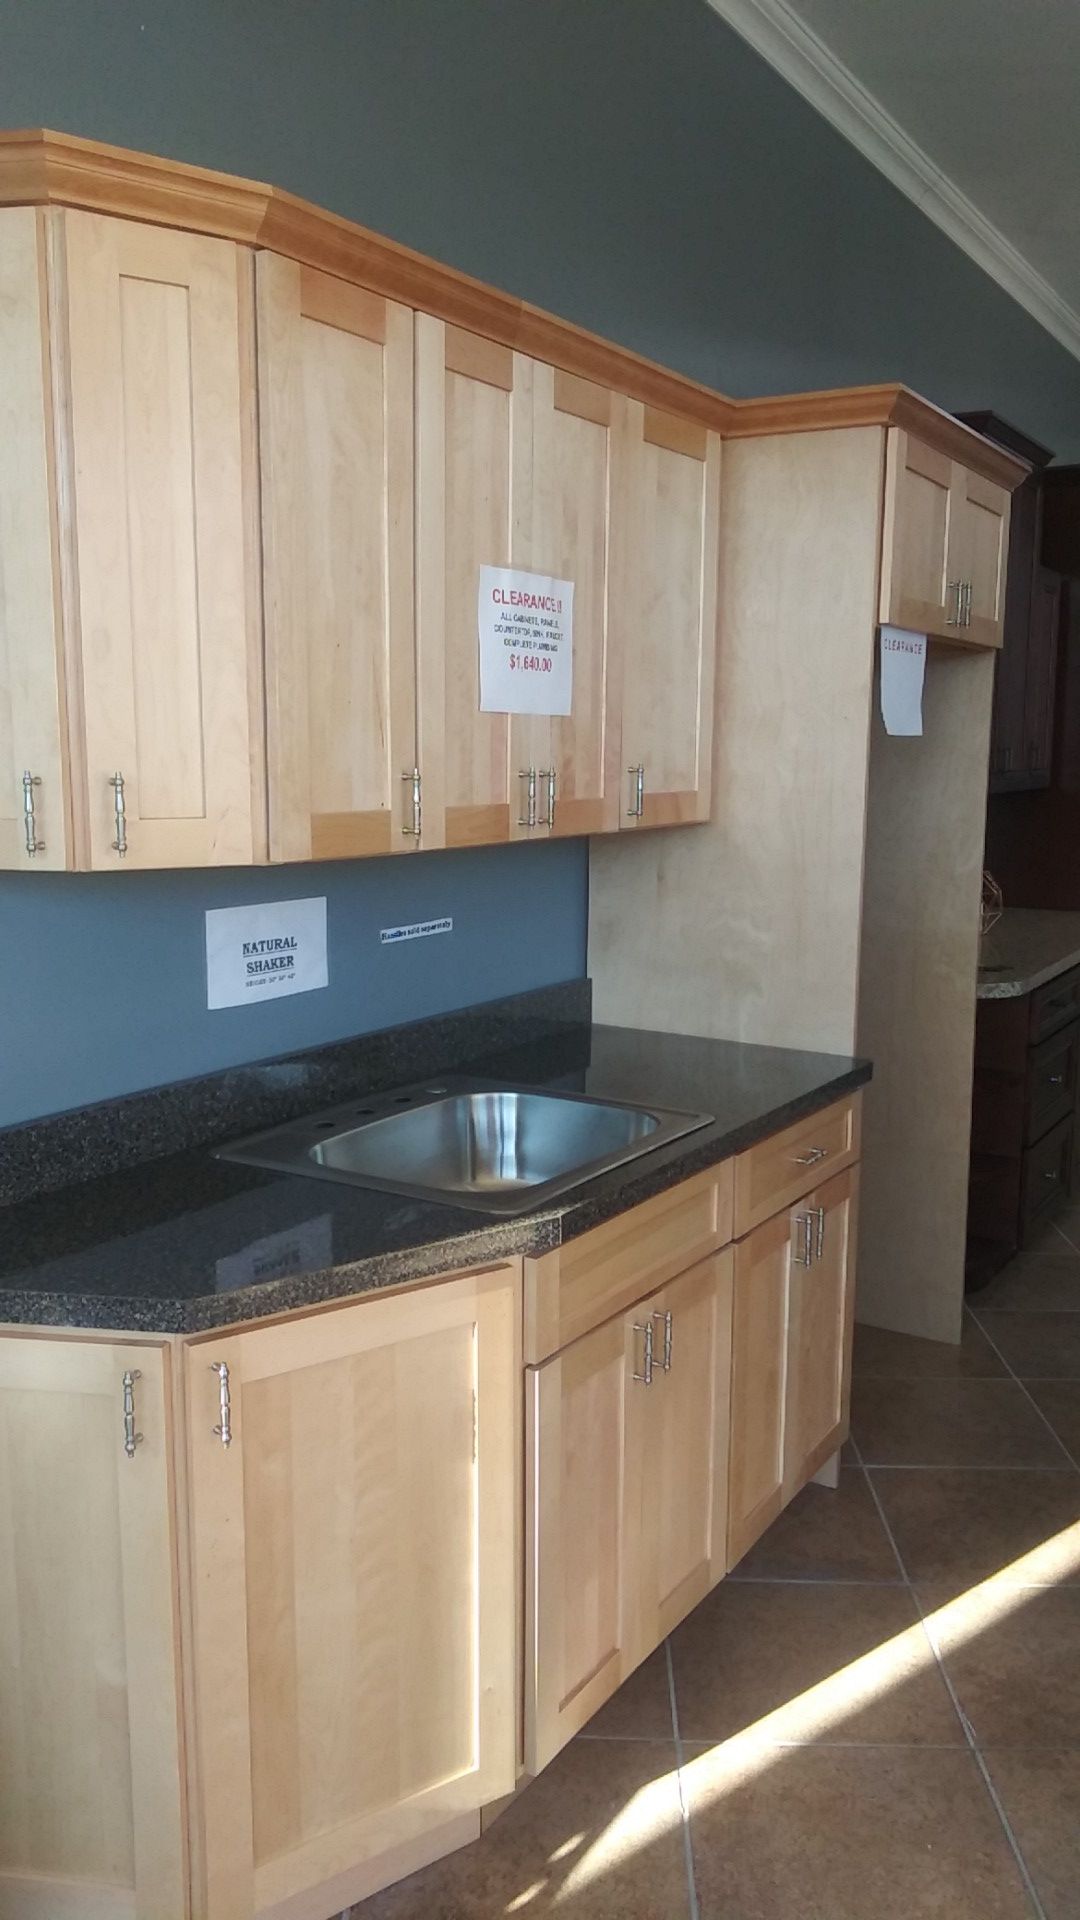 Beautiful natural shaker kitchen cabinets selling floor model kitchen as seen with sink and countertop